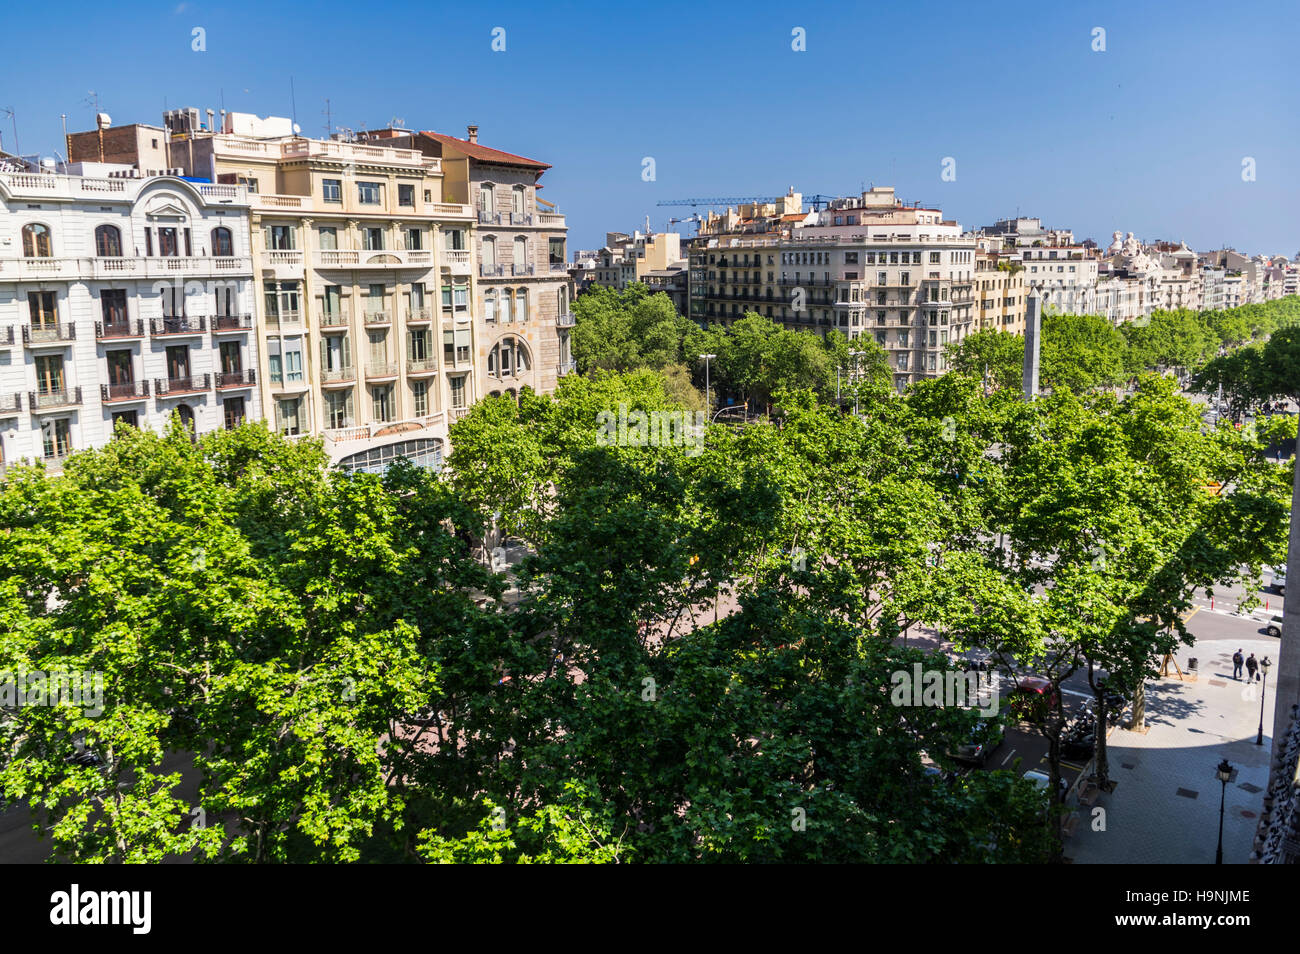 Tree lined alley Passeig de Gràcia in Barcelona, Catalonia, Spain; seen from above. Stock Photo